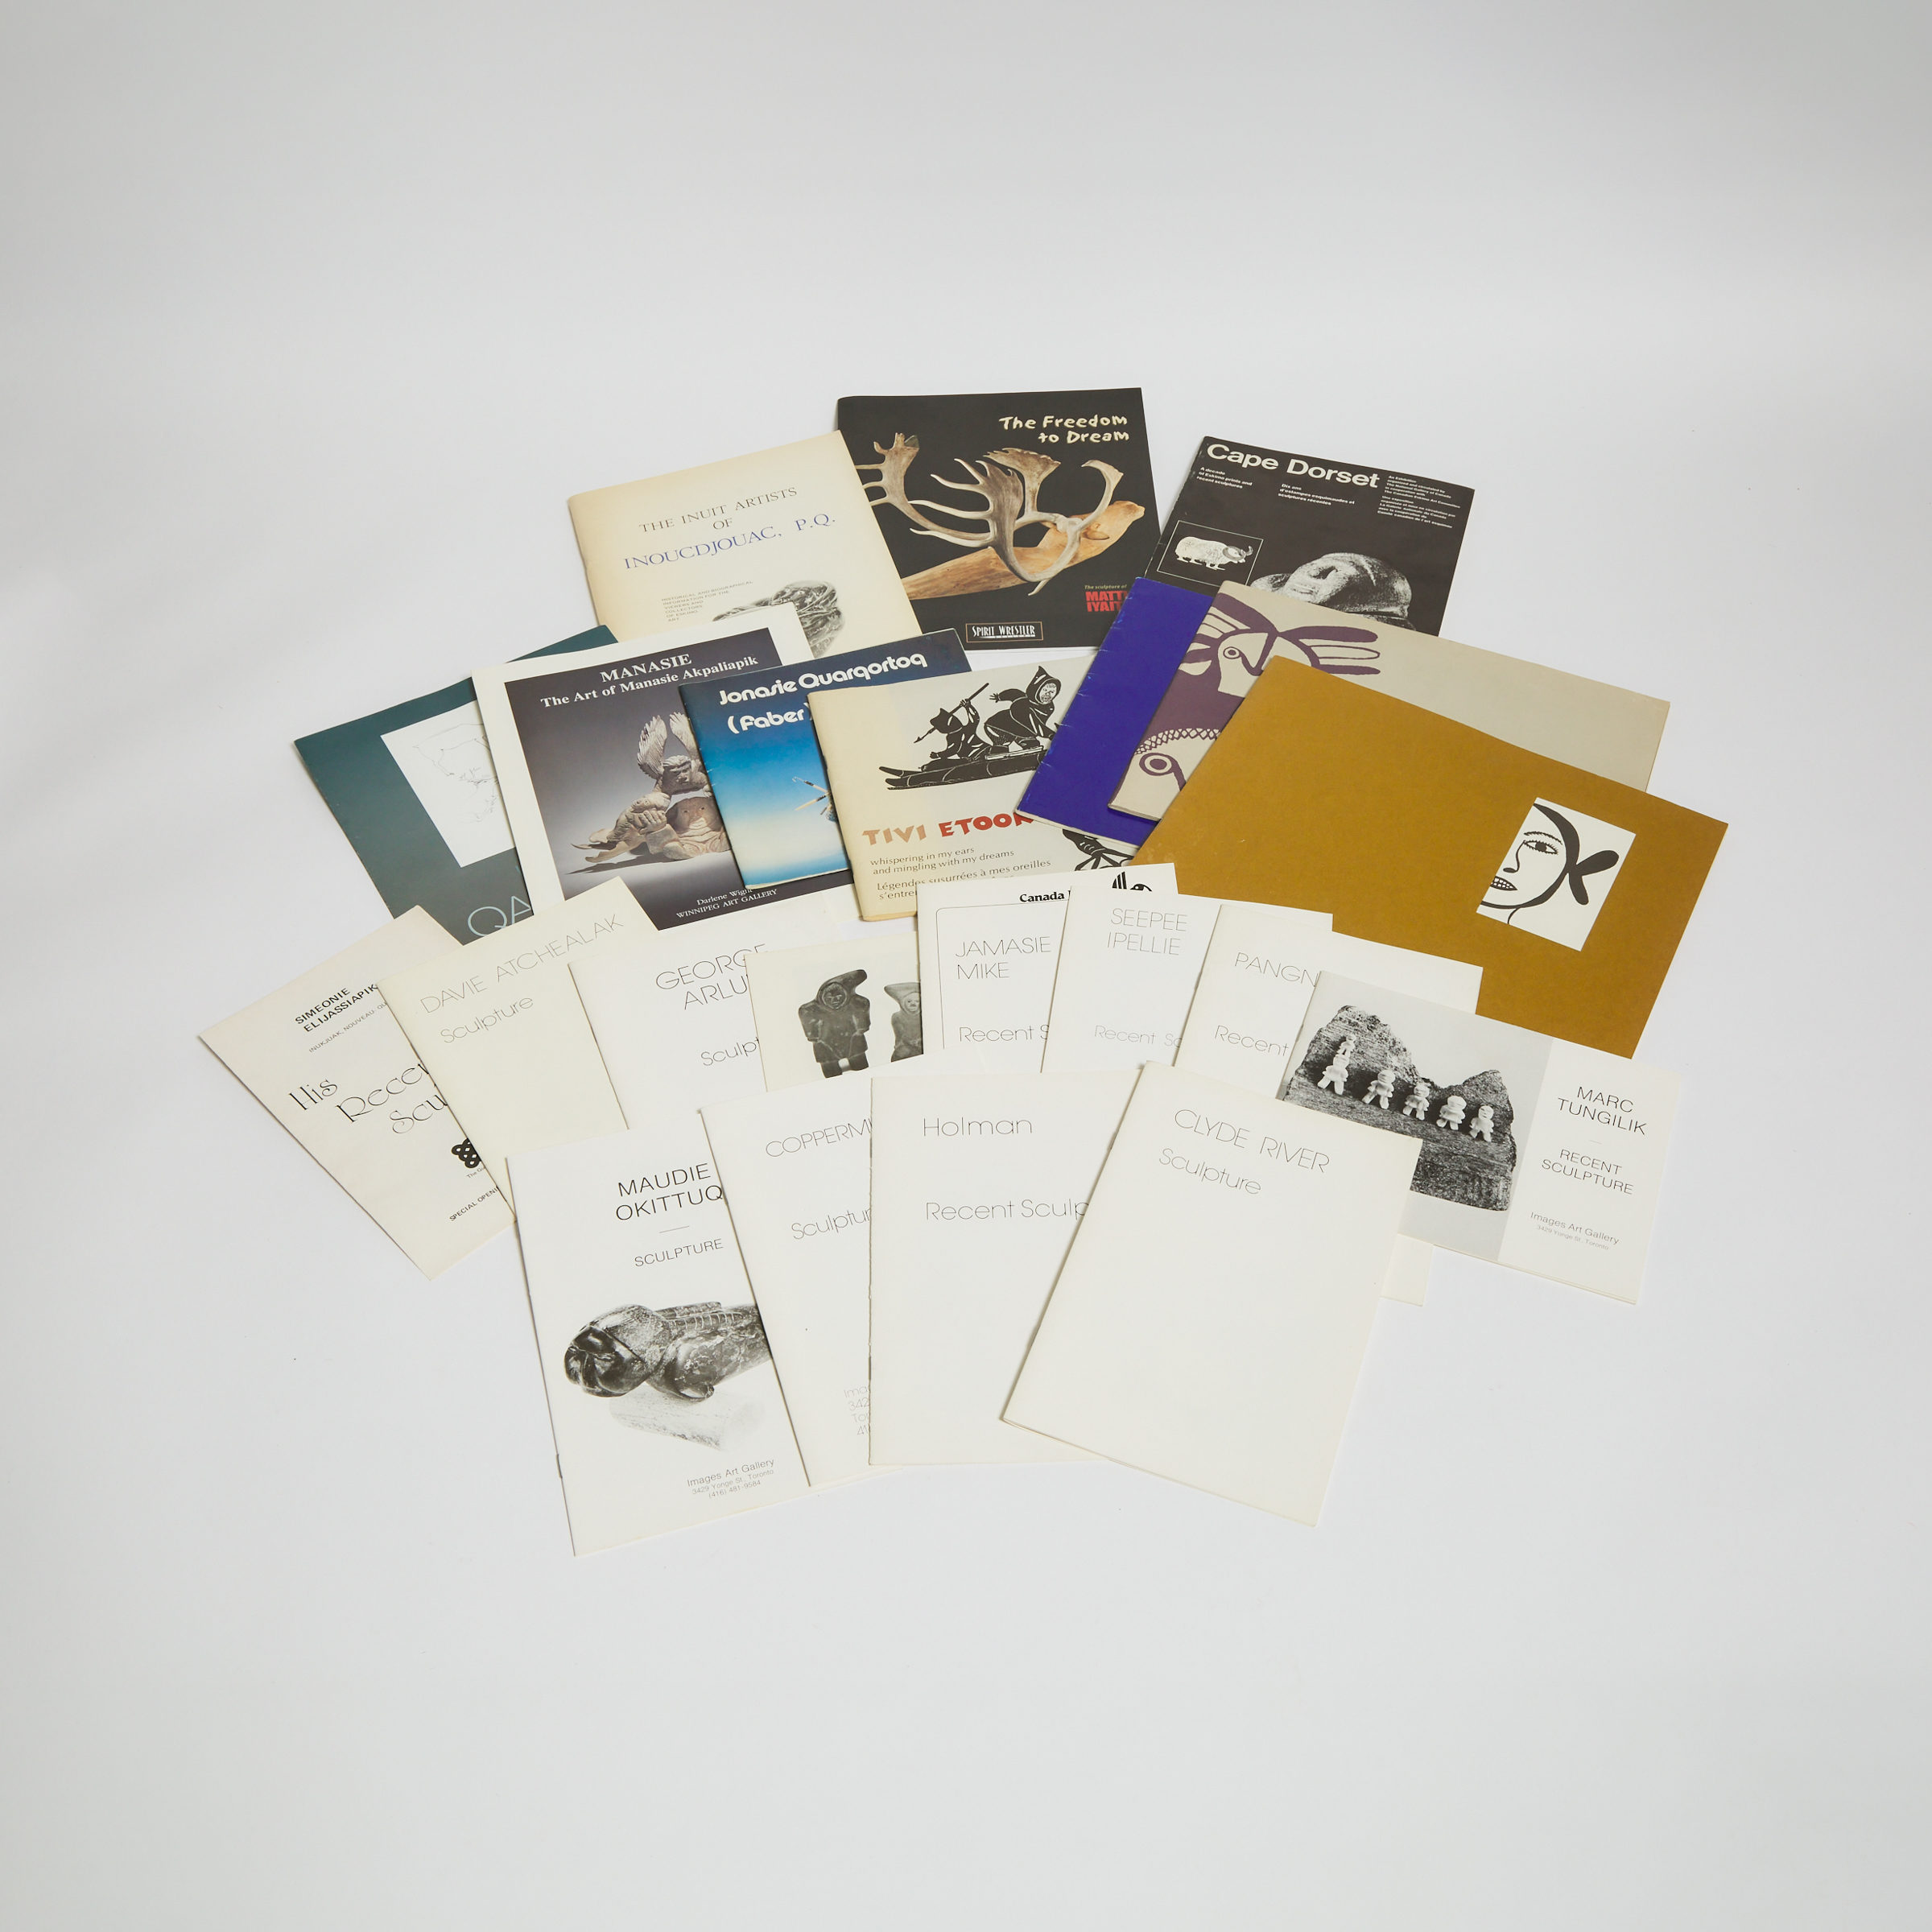 [INUIT ART, GALLERY CATALOGUES AND MONOGRAPHS] LOT OF 22 VOLUMES SOLD TOGETHER 